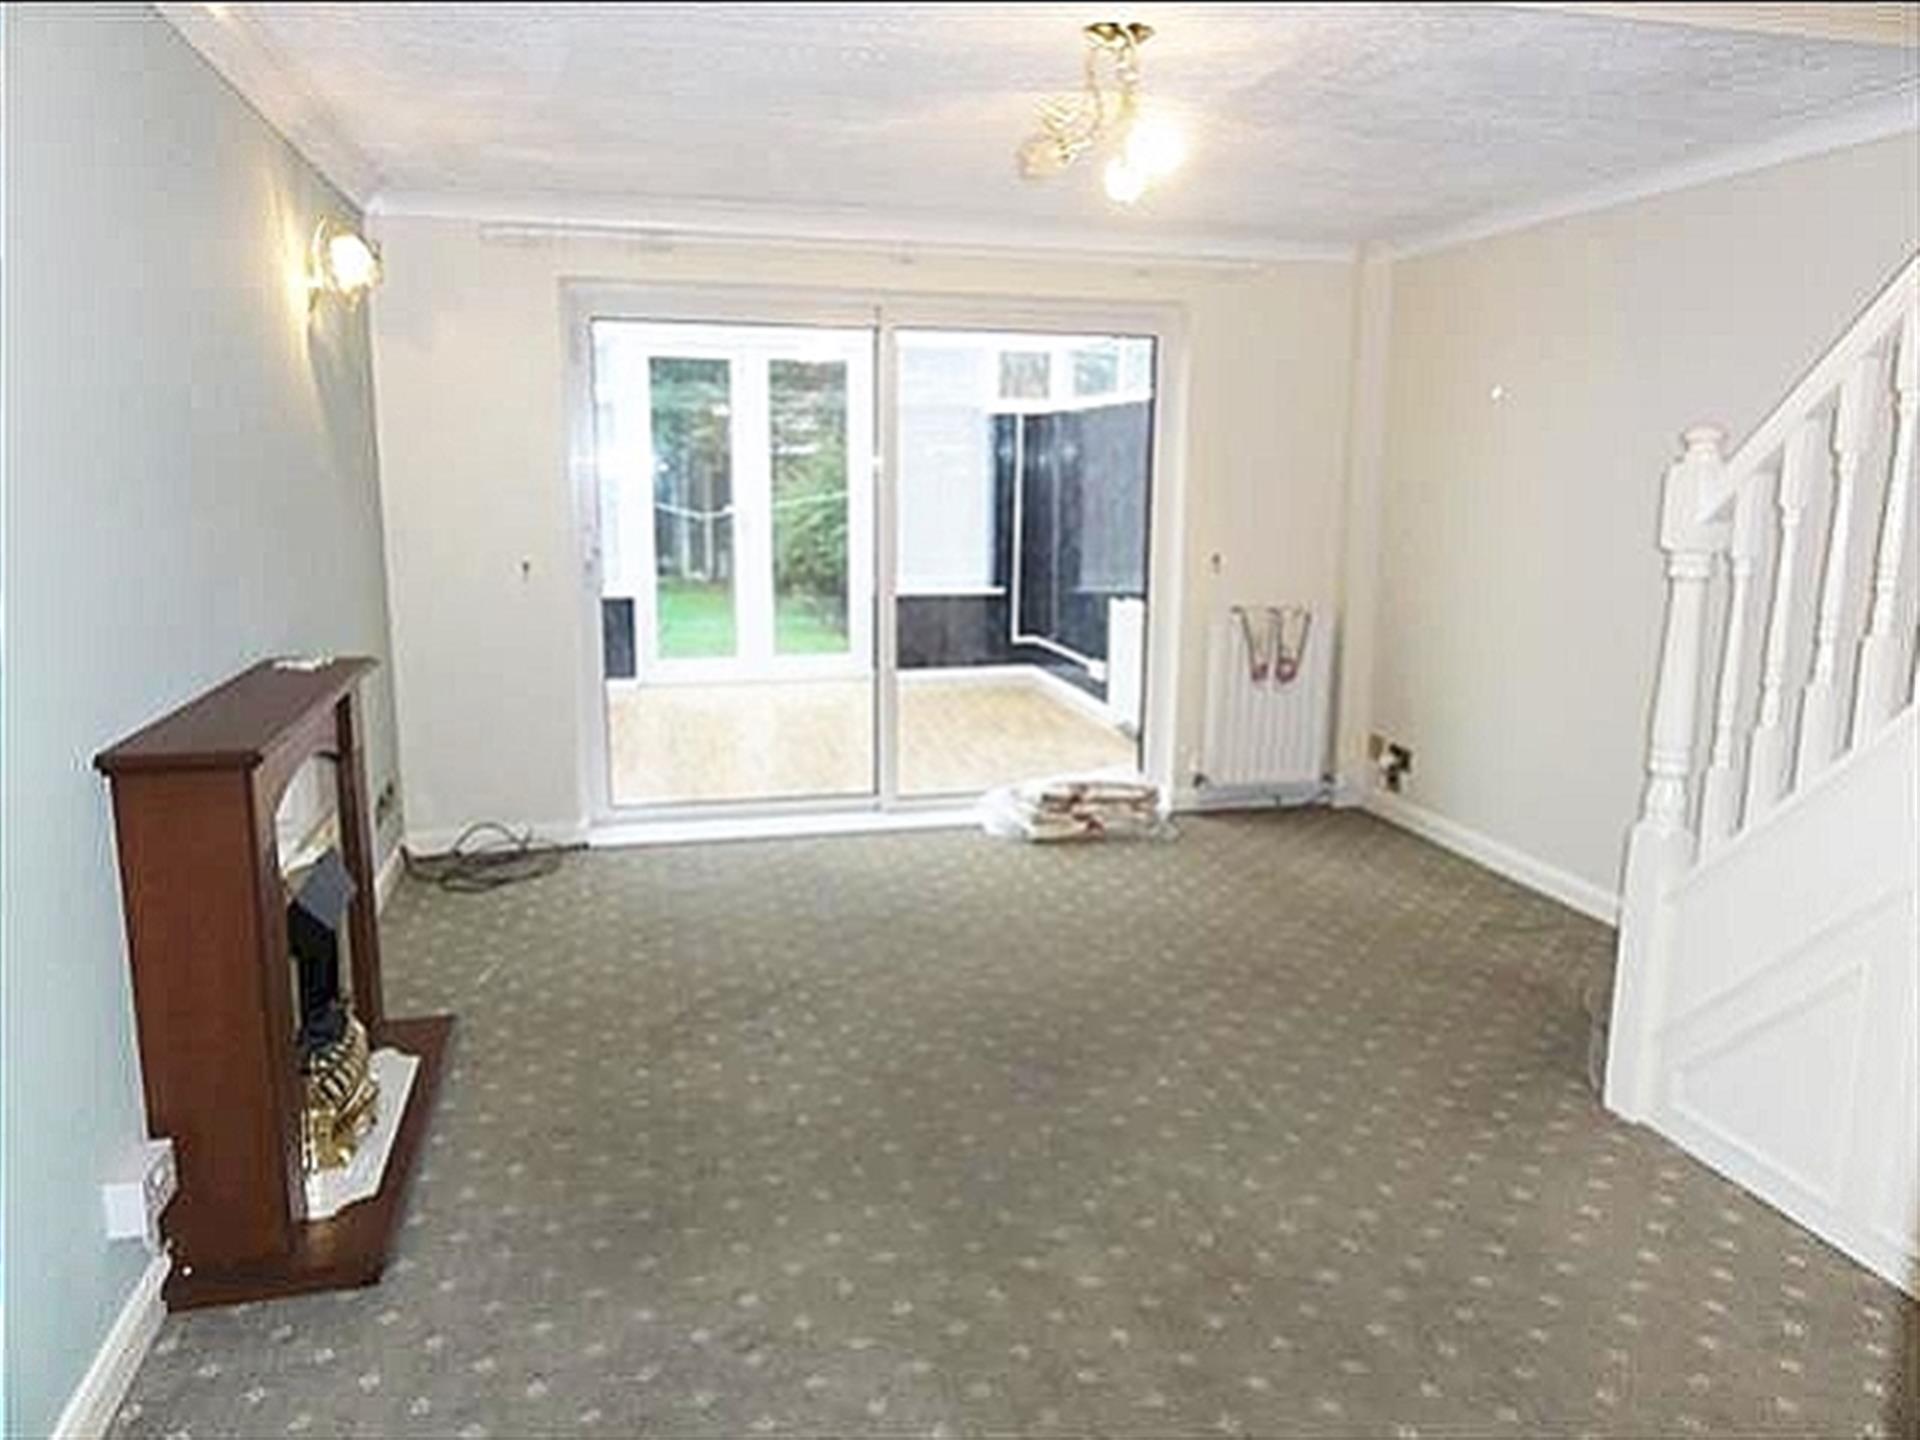 2 Bed Semi-detached House To Rent - Lounge